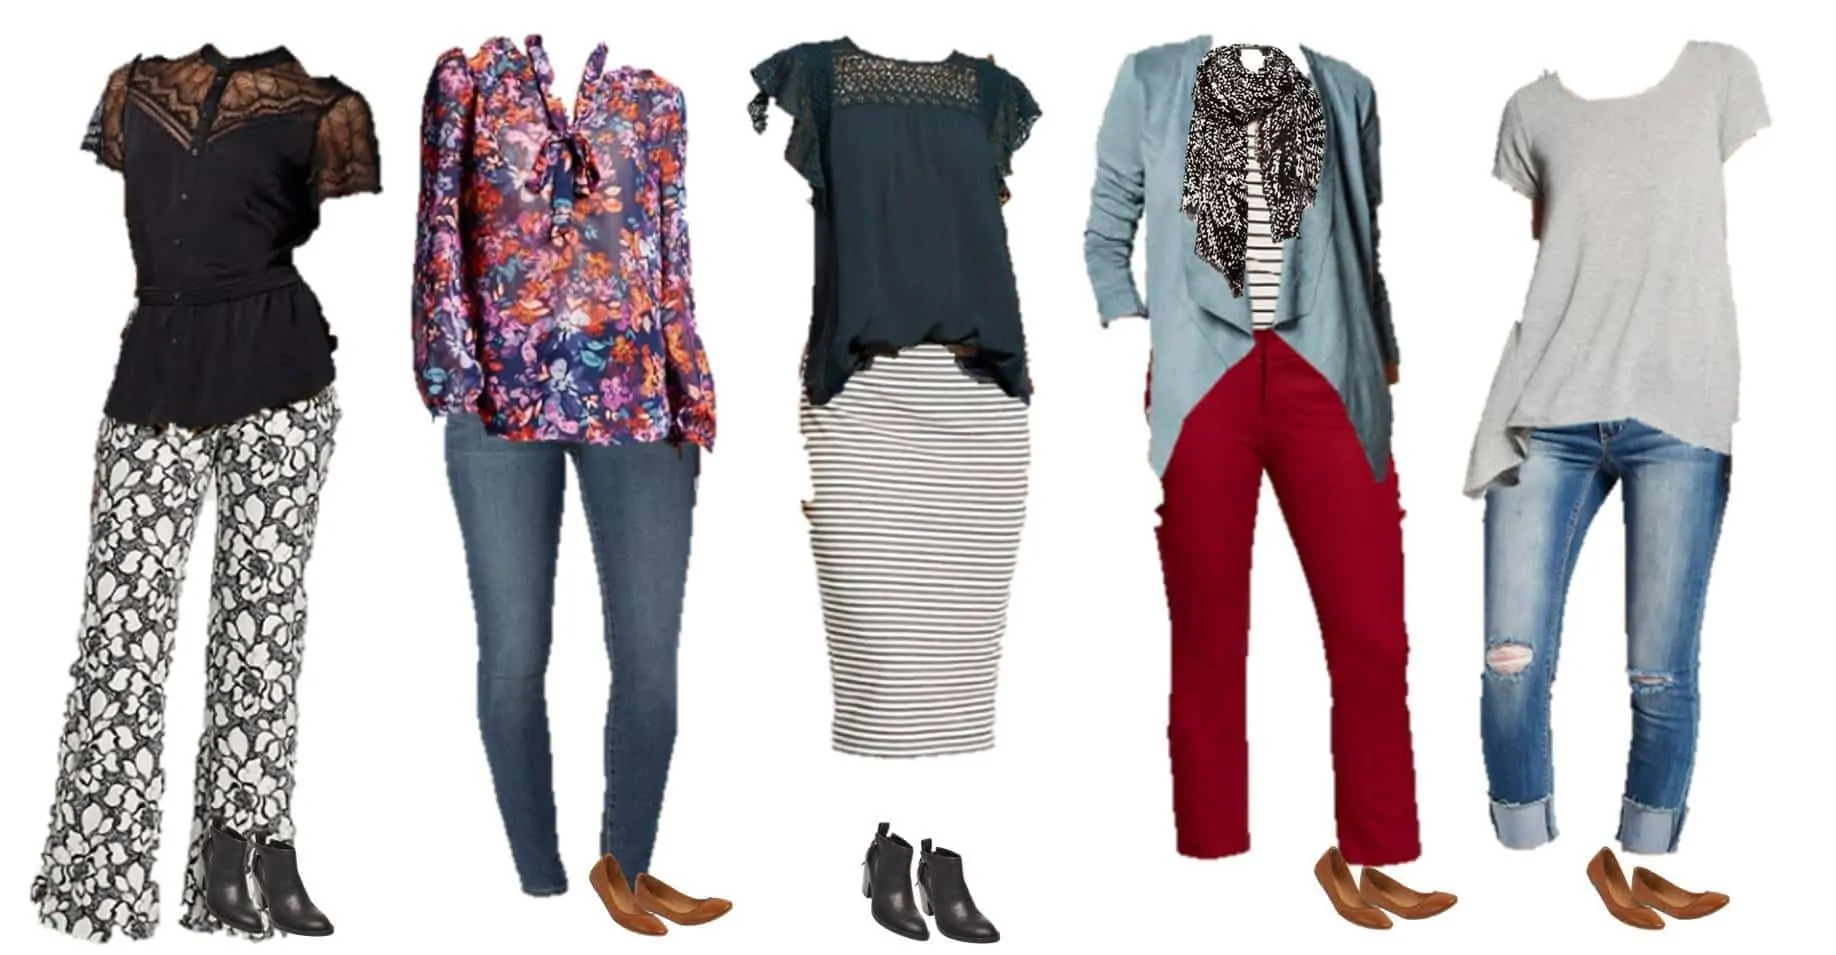 8.2 Mix and Match Fashion - Fall Styles from Target 11-15